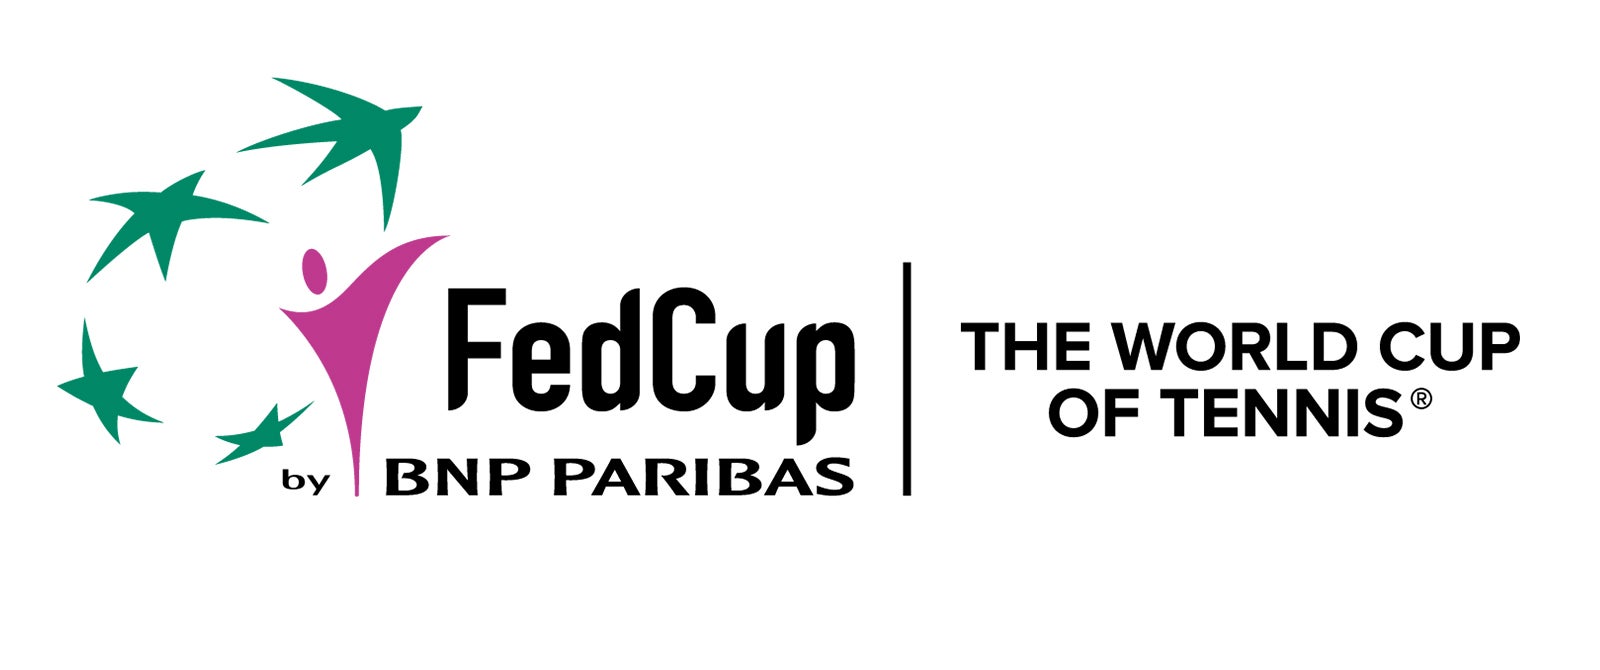 Fed Cup - The World Cup of Tennis